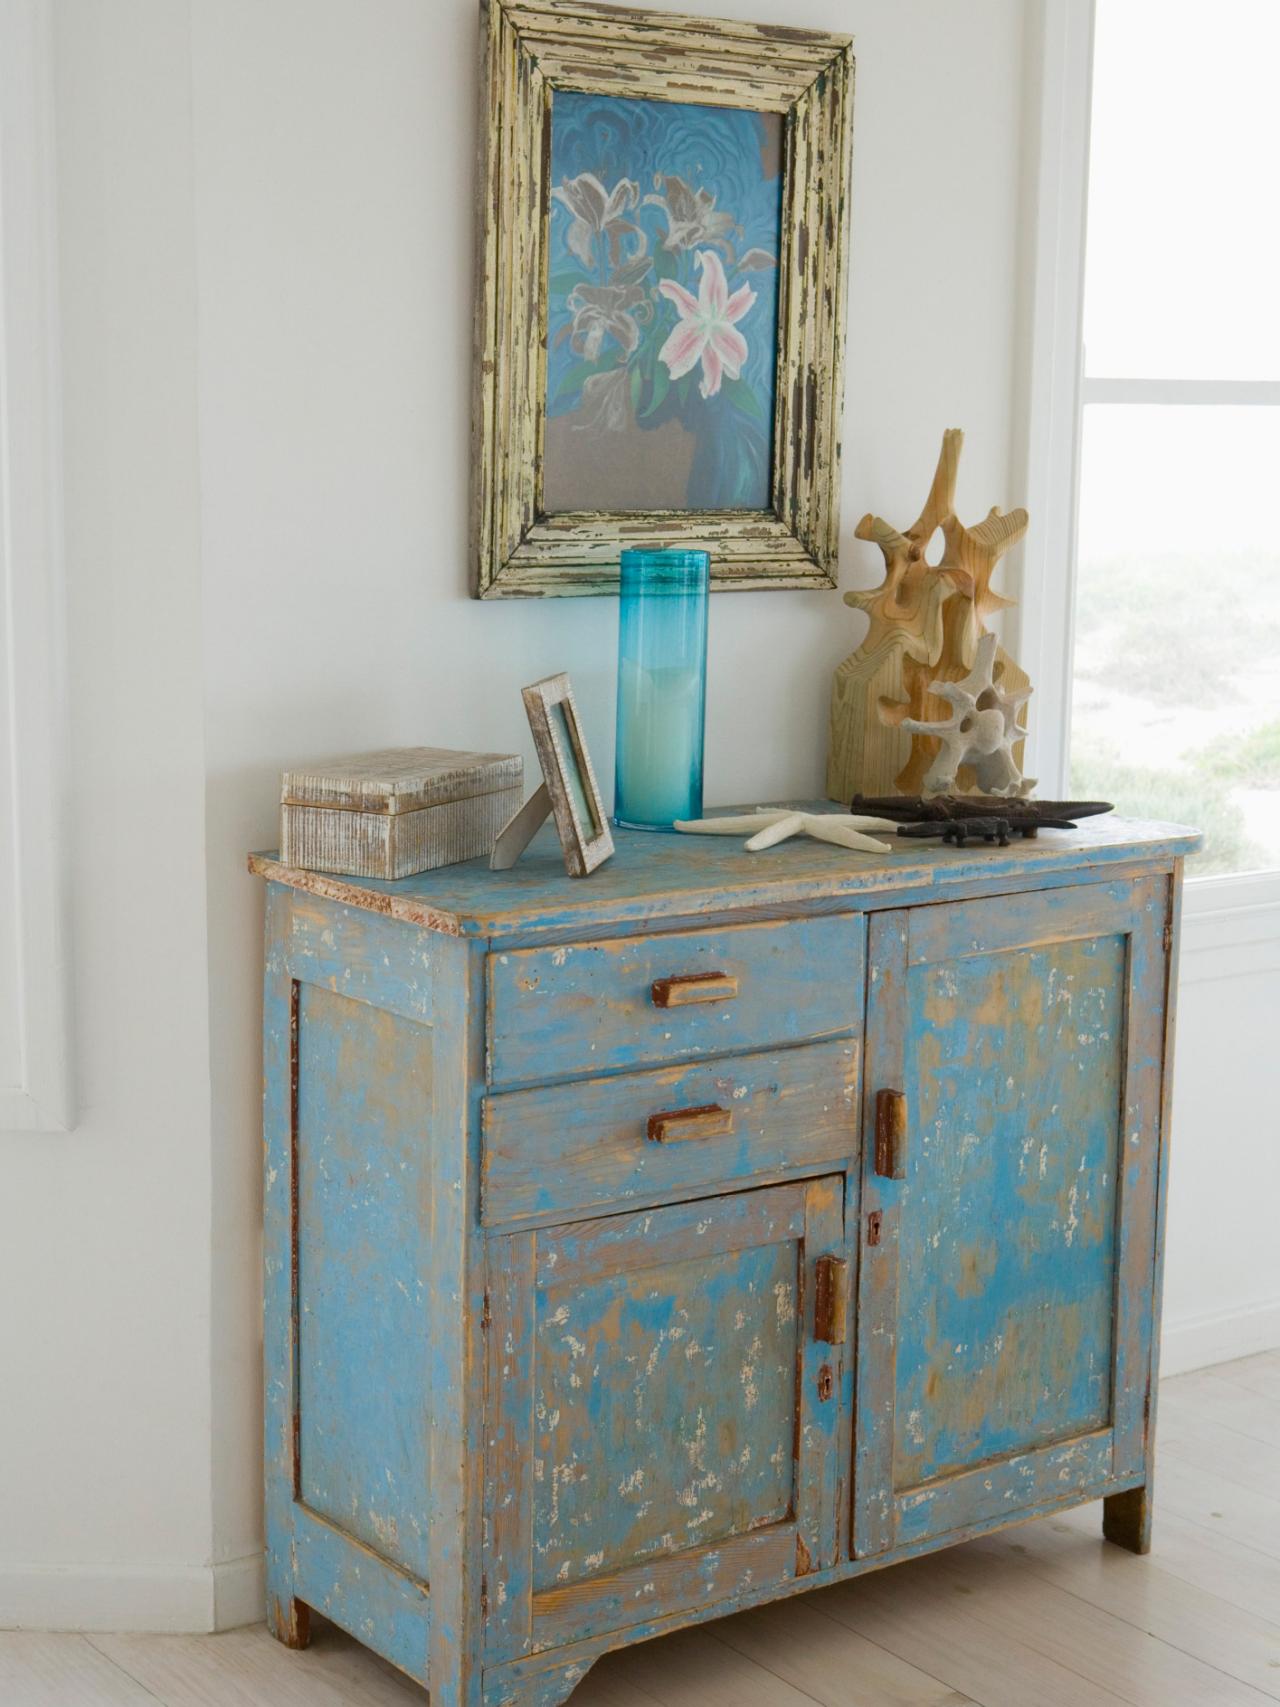 How To Distress Furniture, How To Make A Window Frame Look Distressed